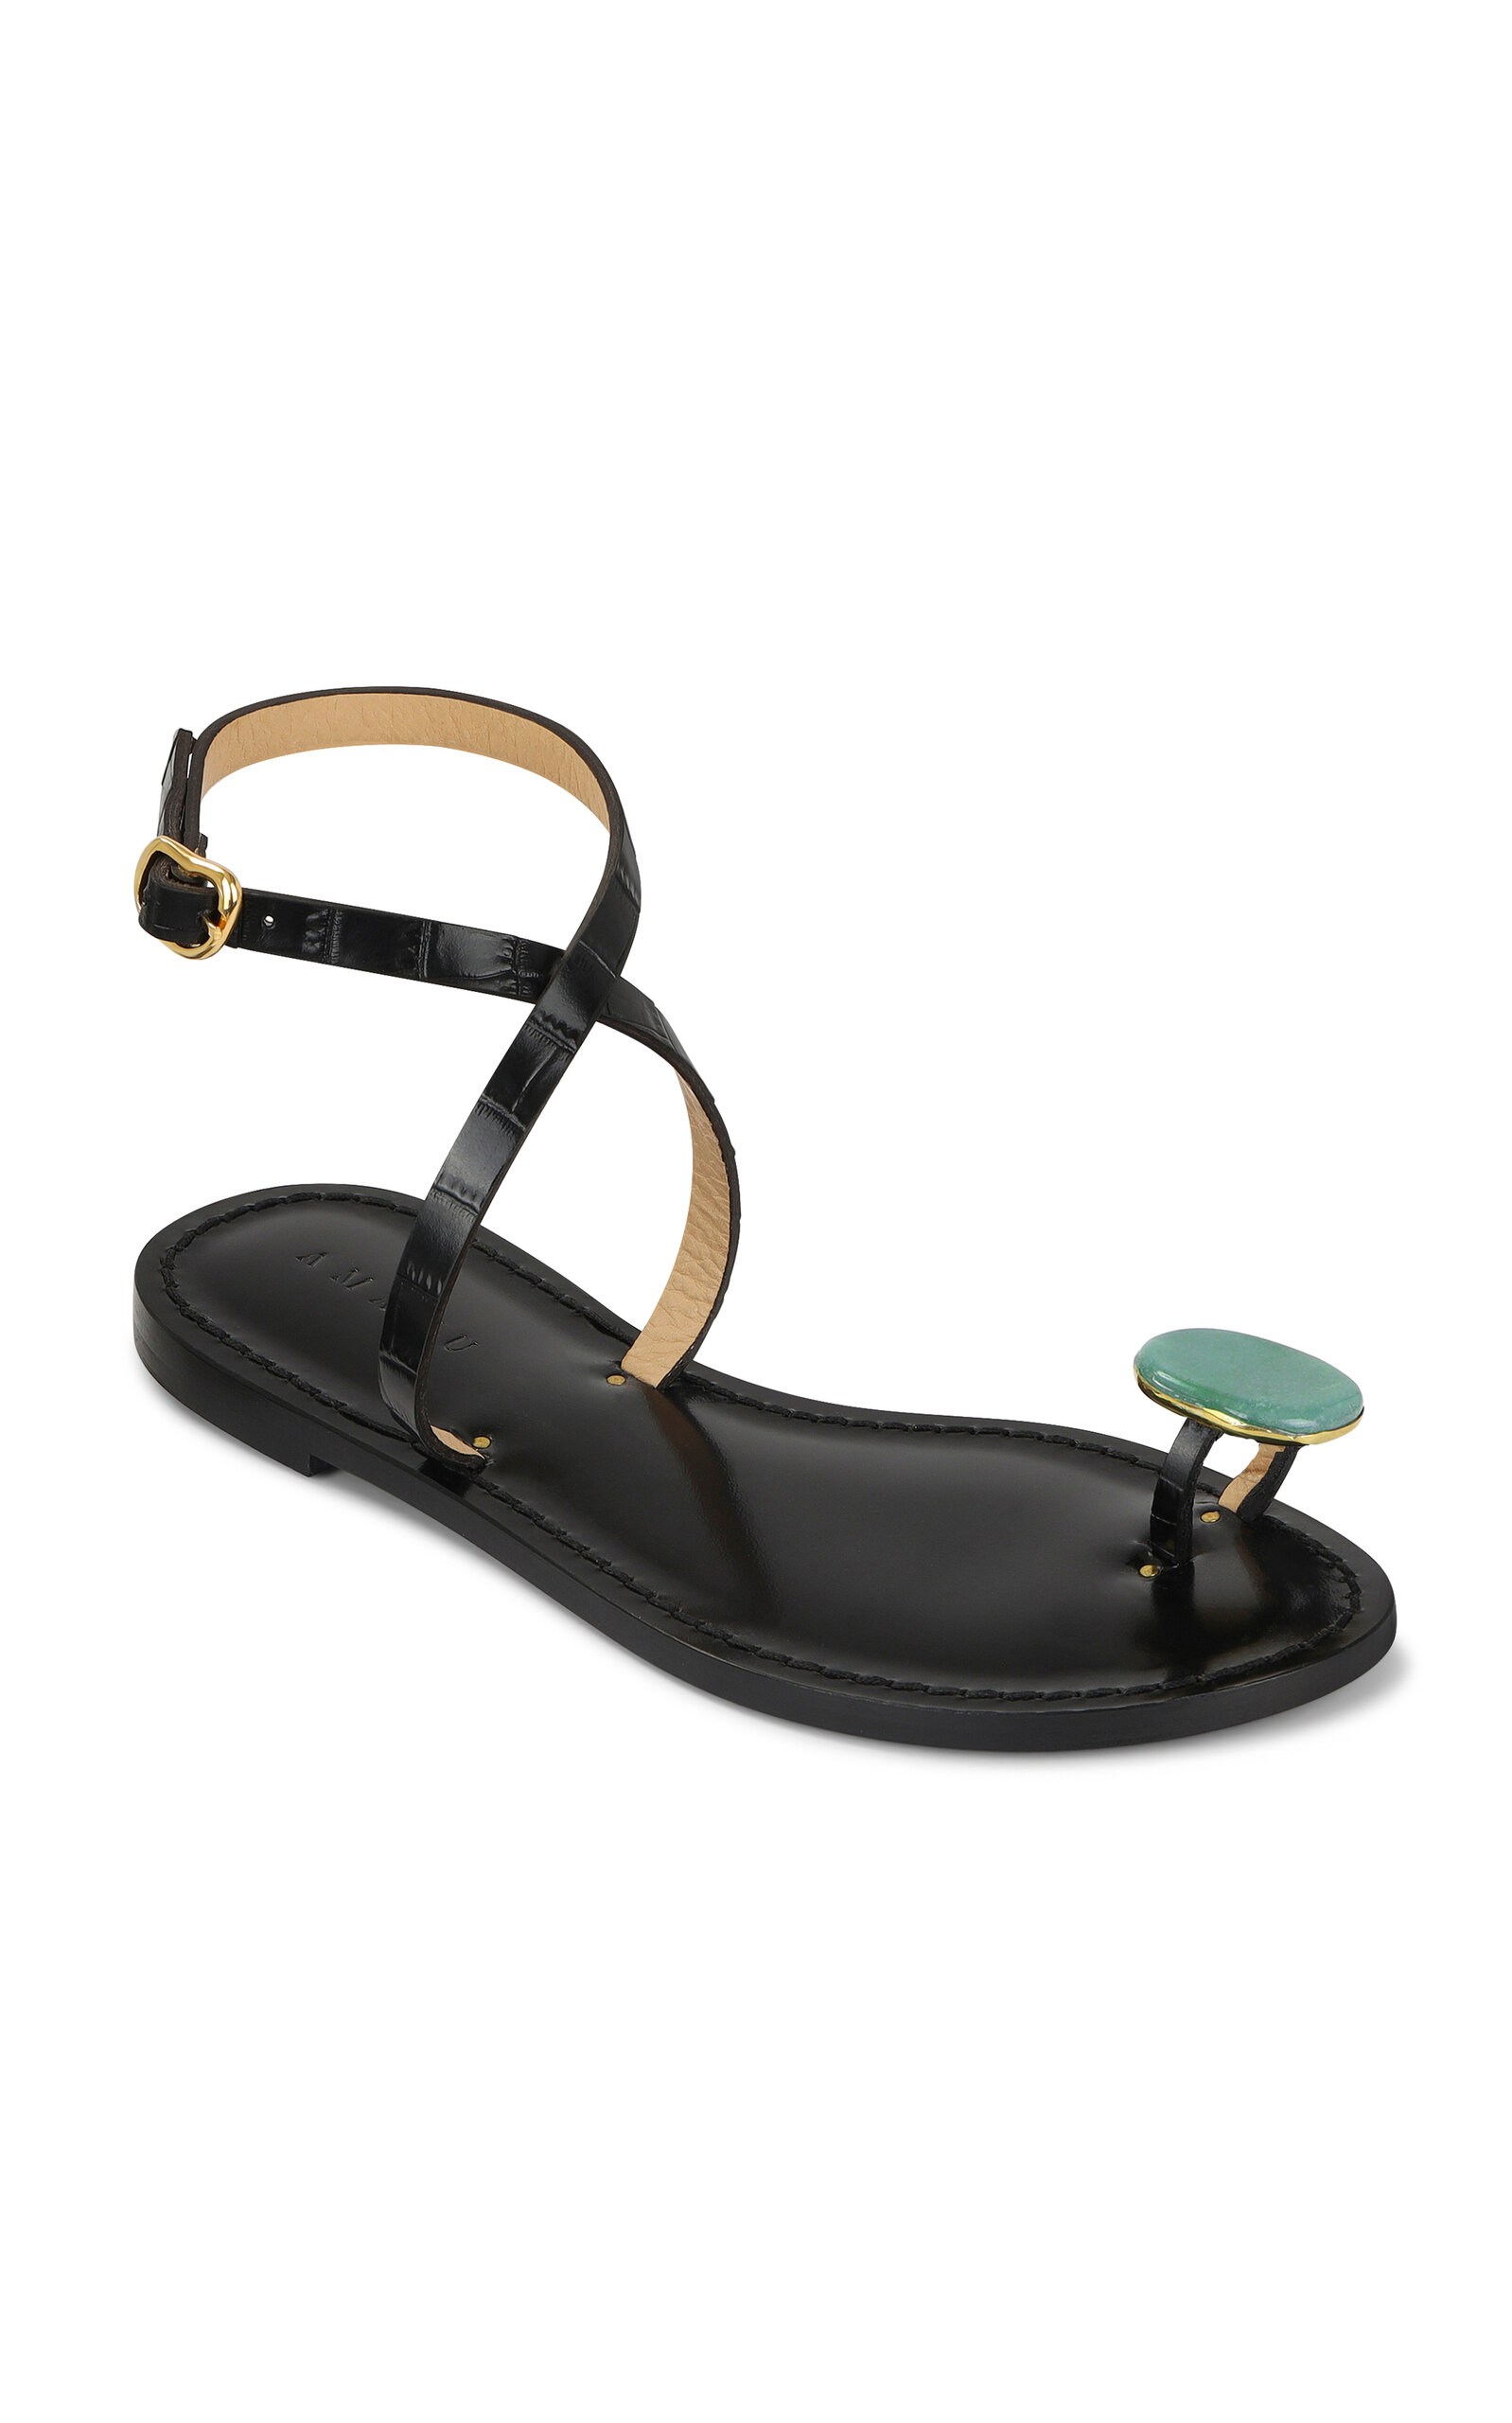 The Kigali Leather Sandals